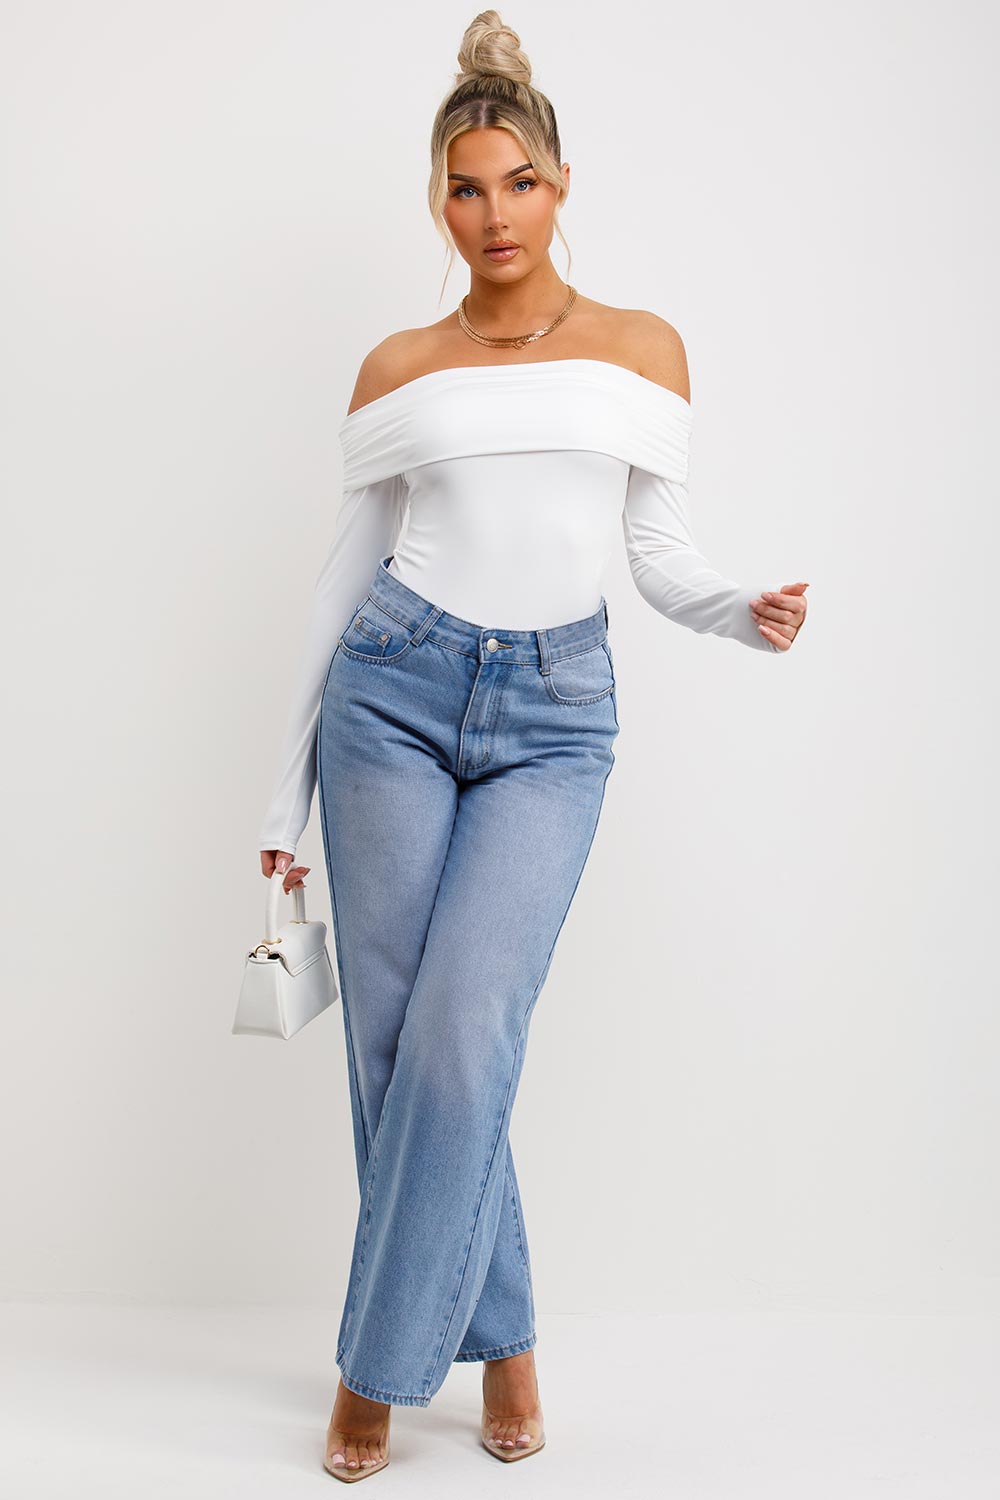 fold over off shoulder long sleeve bodysuit top going out outfit